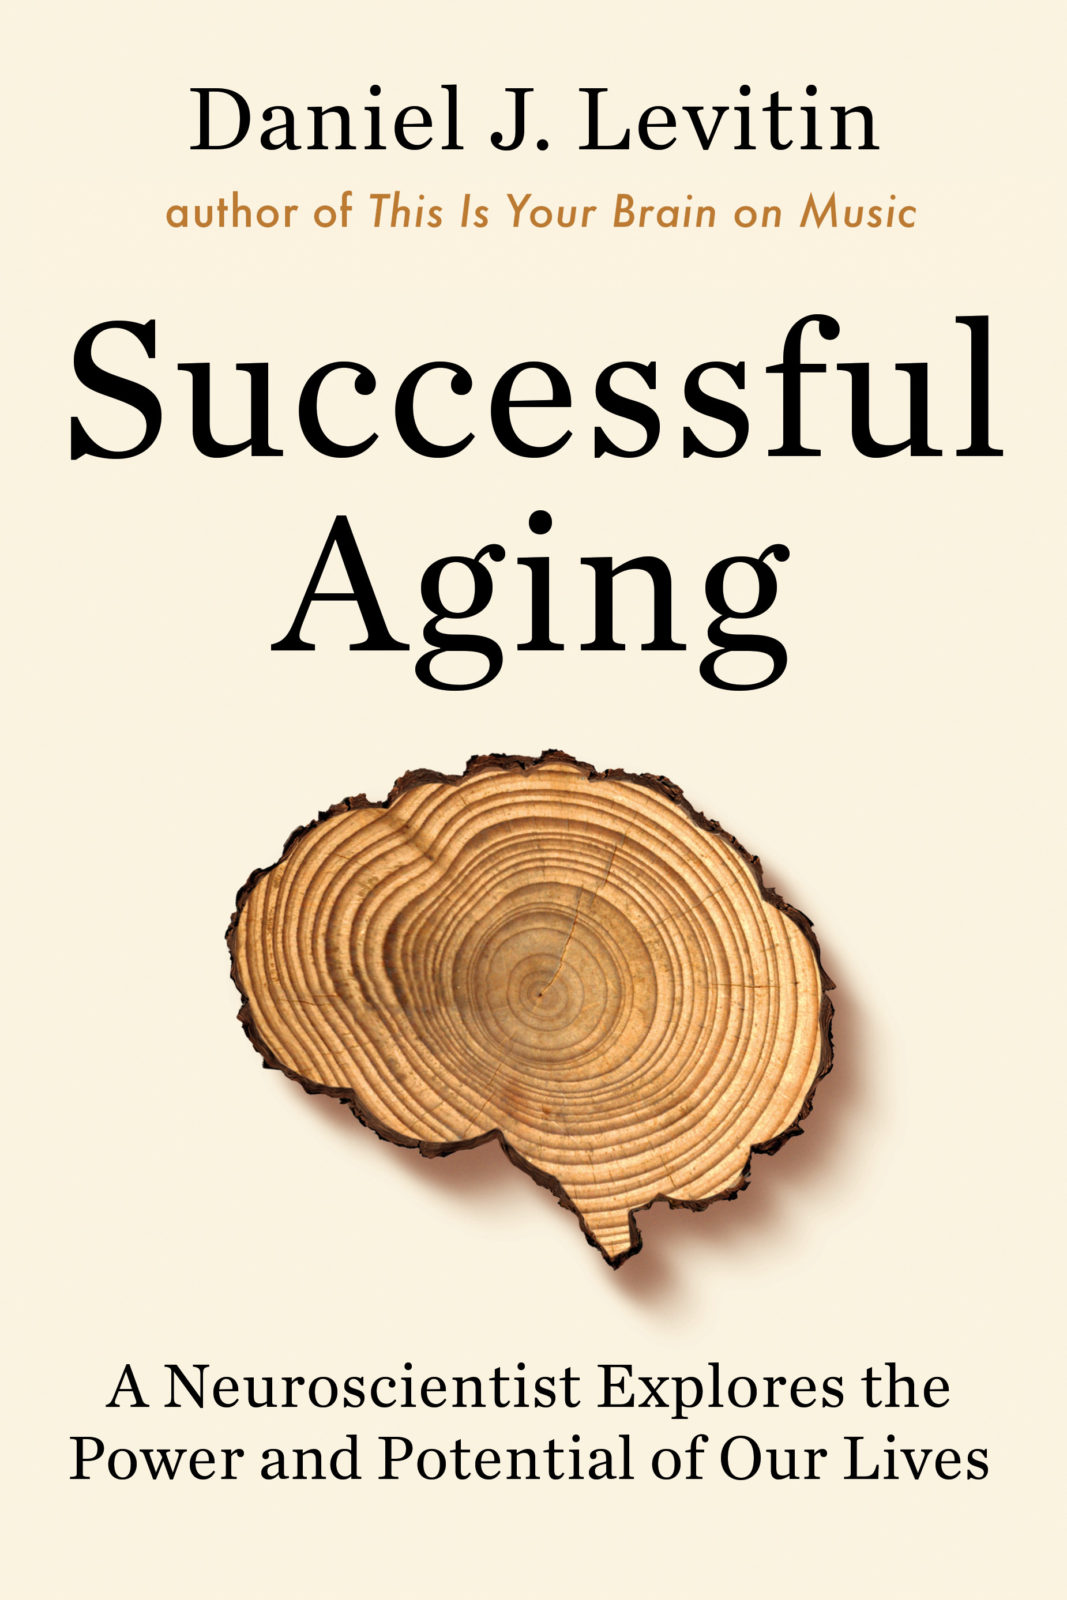 Cover of book called Successful Aging written by Dr. Daniel Levitin